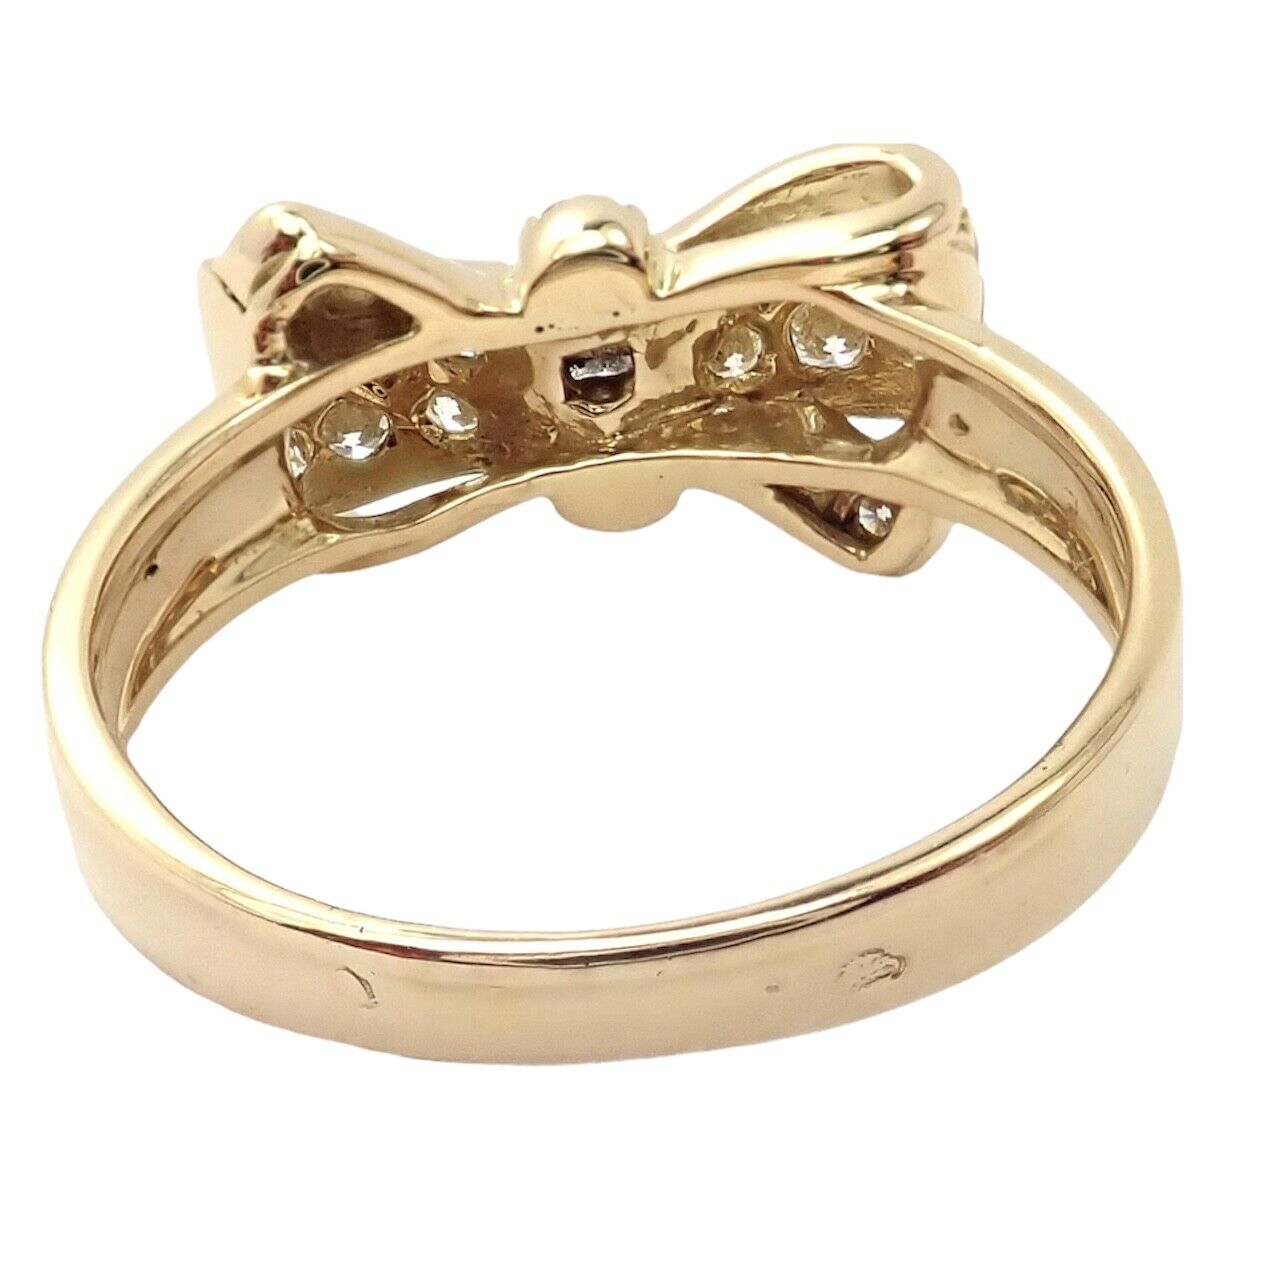 Van Cleef & Arpels Jewelry & Watches:Fine Jewelry:Rings Vintage! Authentic Van Cleef & Arpels 18k Yellow Gold Diamond Bow Band Ring